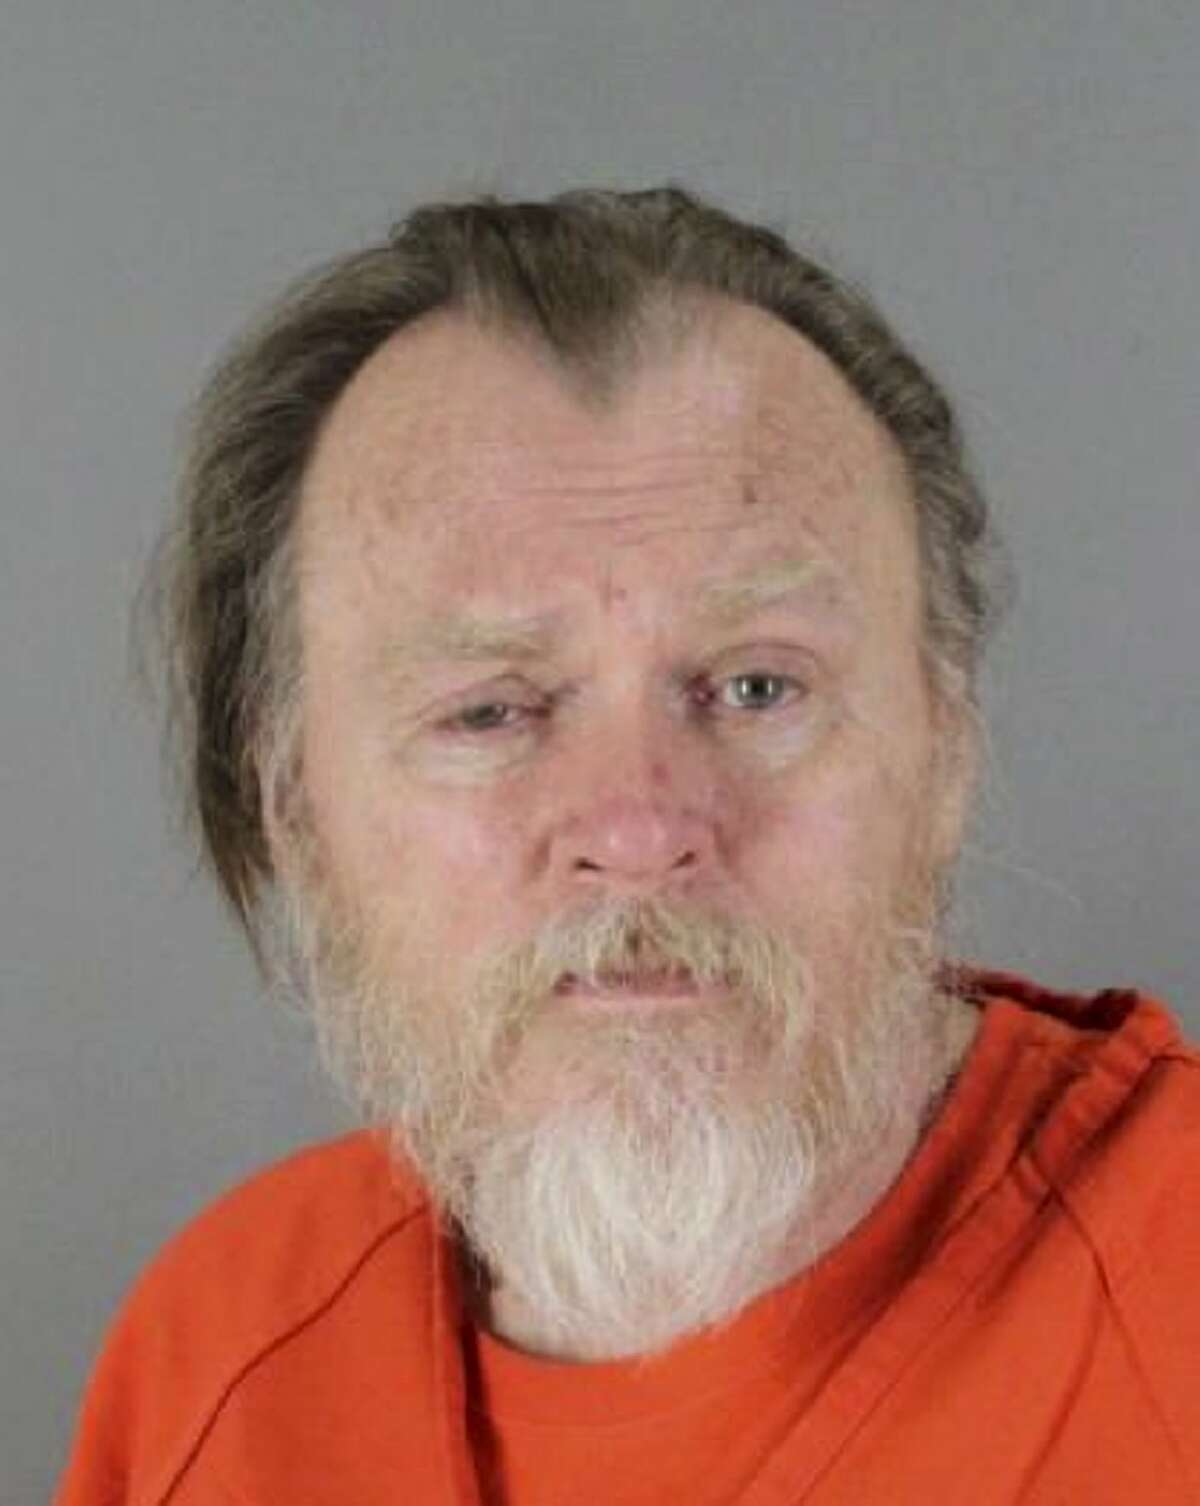 This undated file photo provided by the San Mateo County Sheriff’s Office shows Rodney Halbower. A Northern California jury found the career criminal authorities believe is the Gypsy Hill Killer guilty in the slaying of two teens. San Mateo County jurors started deliberating late Tuesday, Sept. 18, 2018, after eight days of testimony in Redwood City, about 25 miles (40 kilometers) south of San Francisco. Halbower was charged with raping and killing two teenage women in 1976 in the quiet suburbs just south of San Francisco.